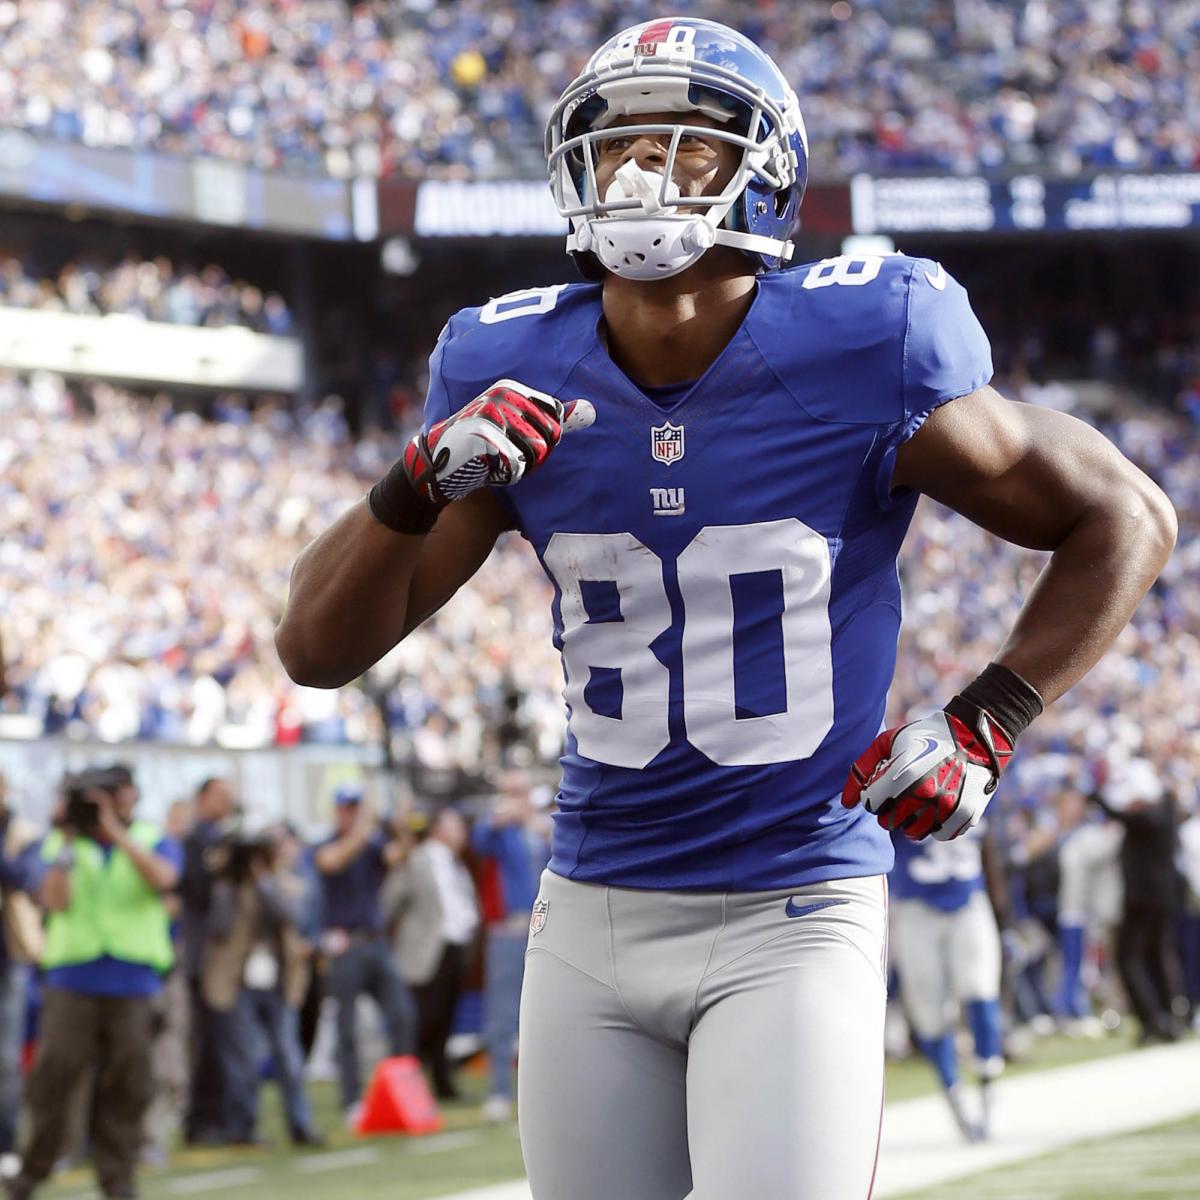 NFL Throwback Highlights] Need a little Salsa? Happy 35th birthday to  Victor Cruz! : r/nfl